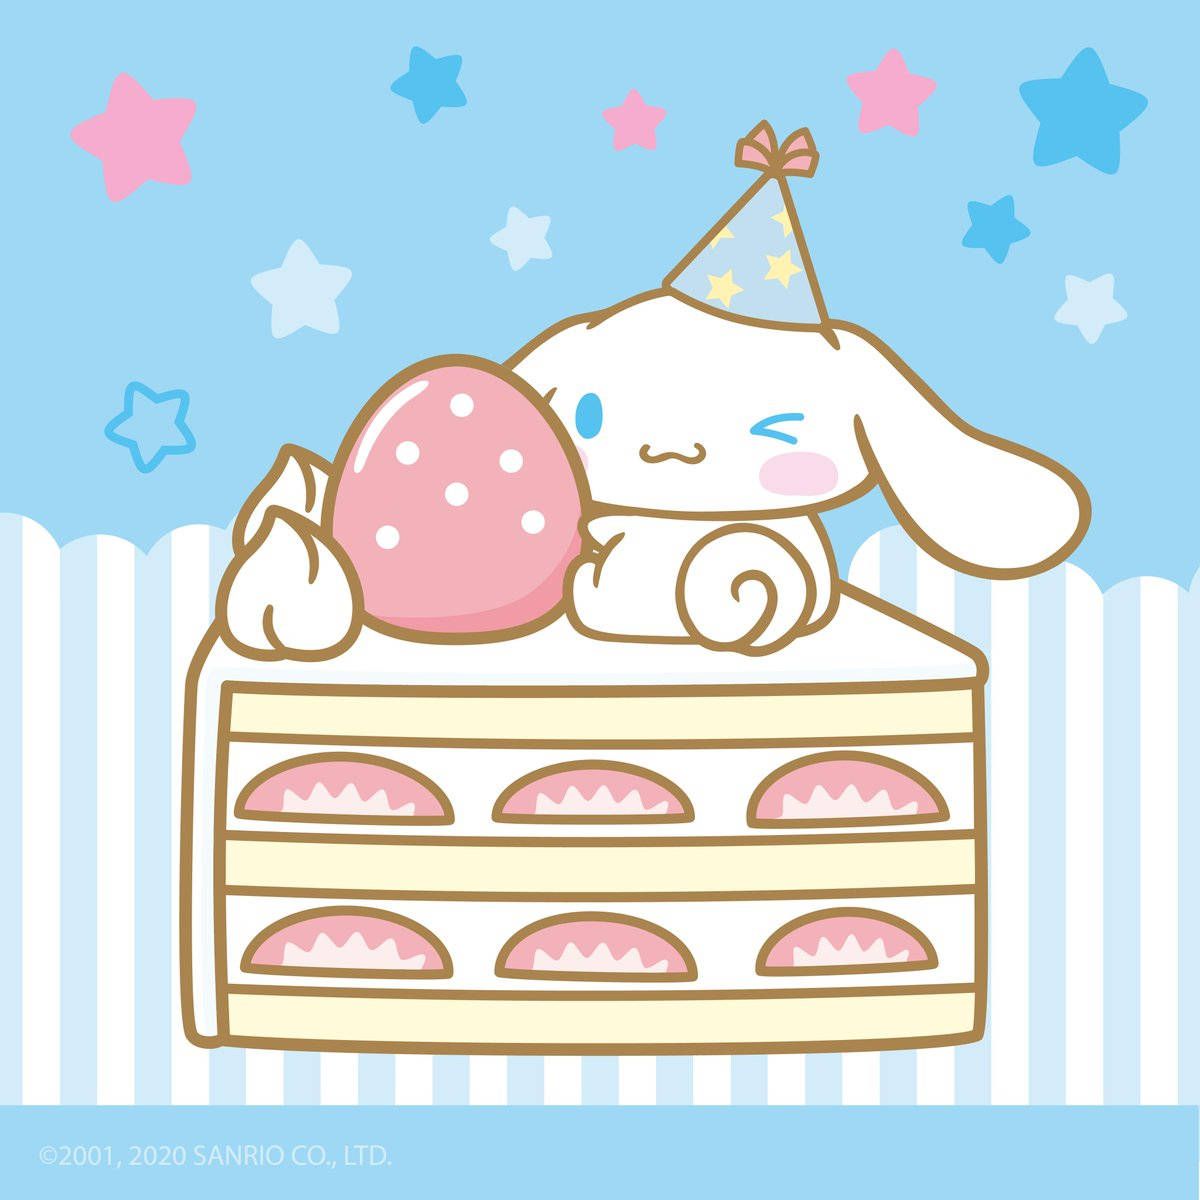 A cake with an egg on top of it - Cinnamoroll